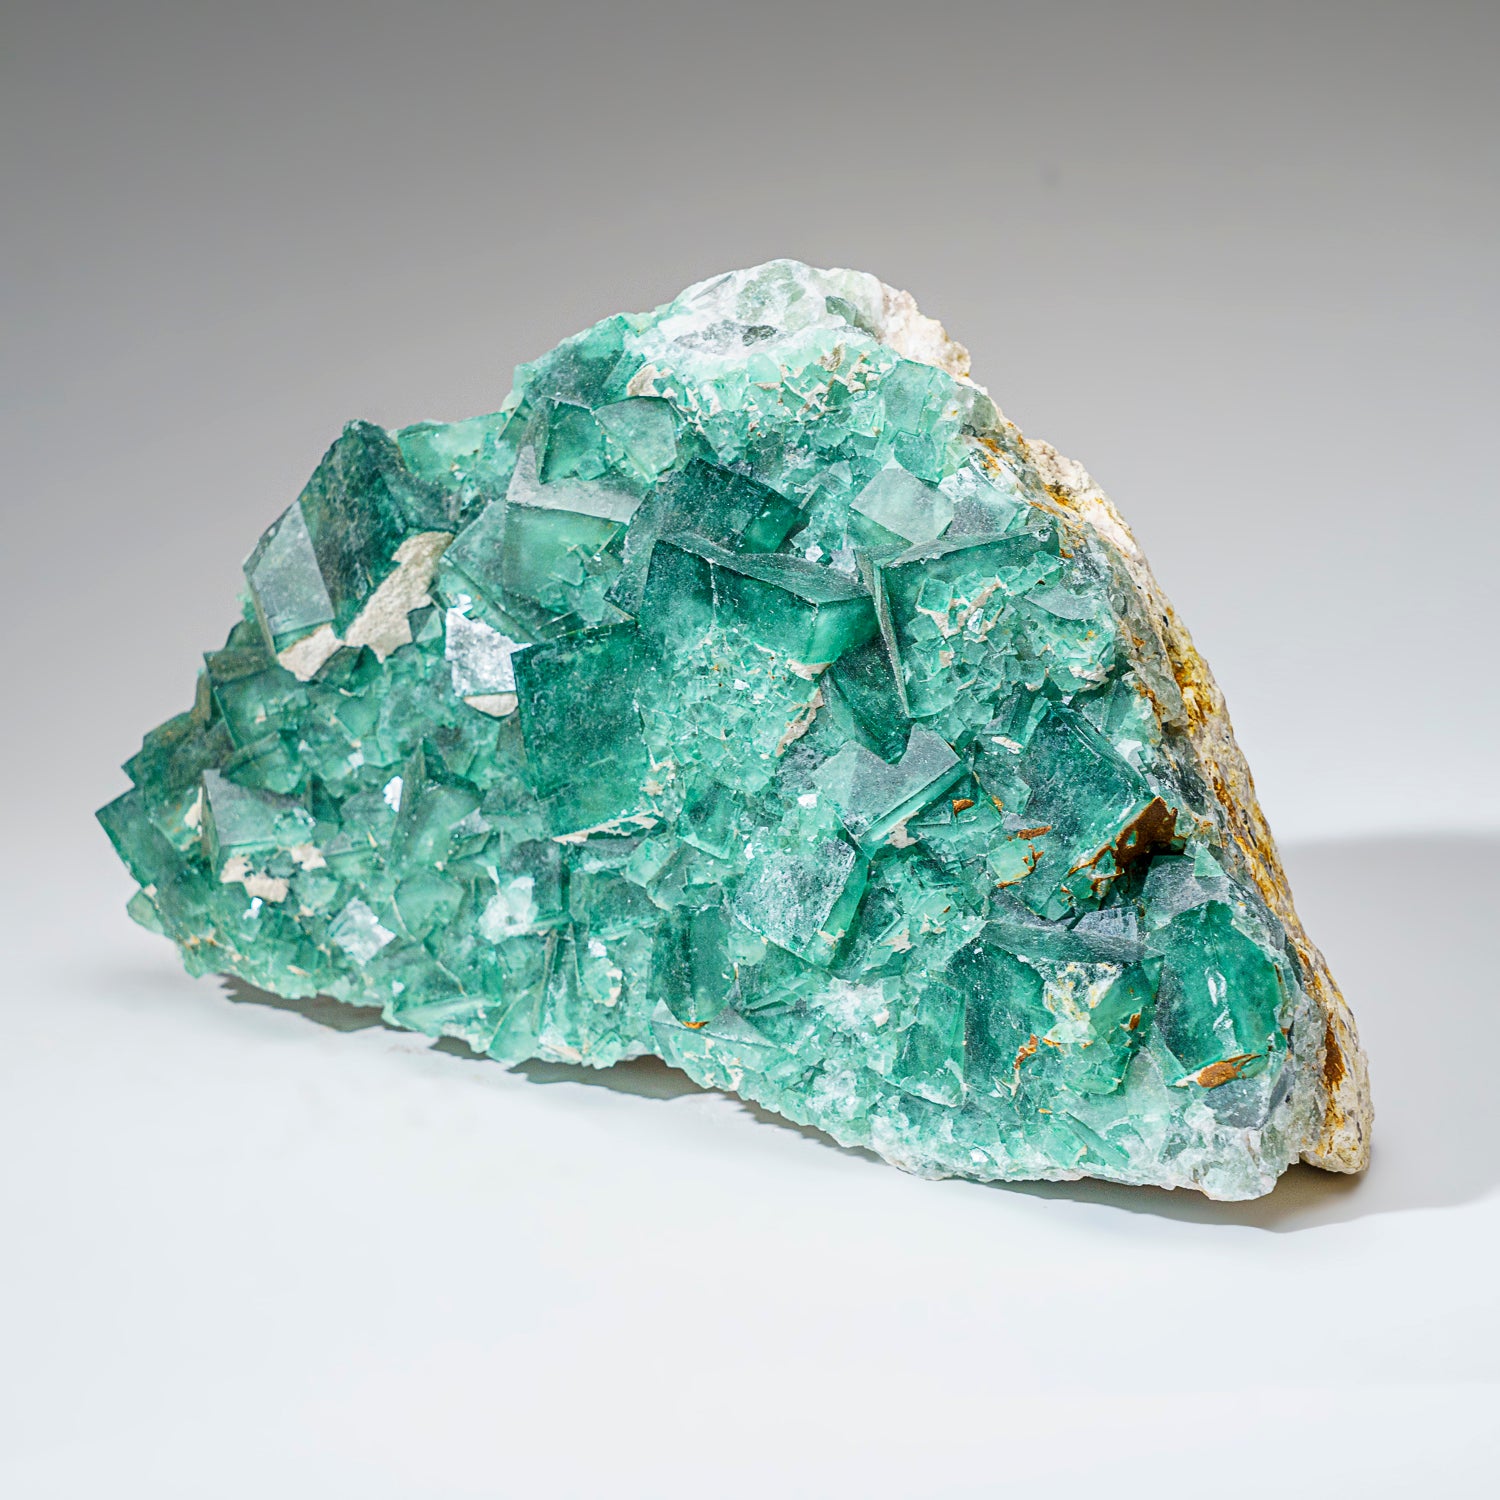 Genuine Green Fluorite from Namibia (7 lbs)